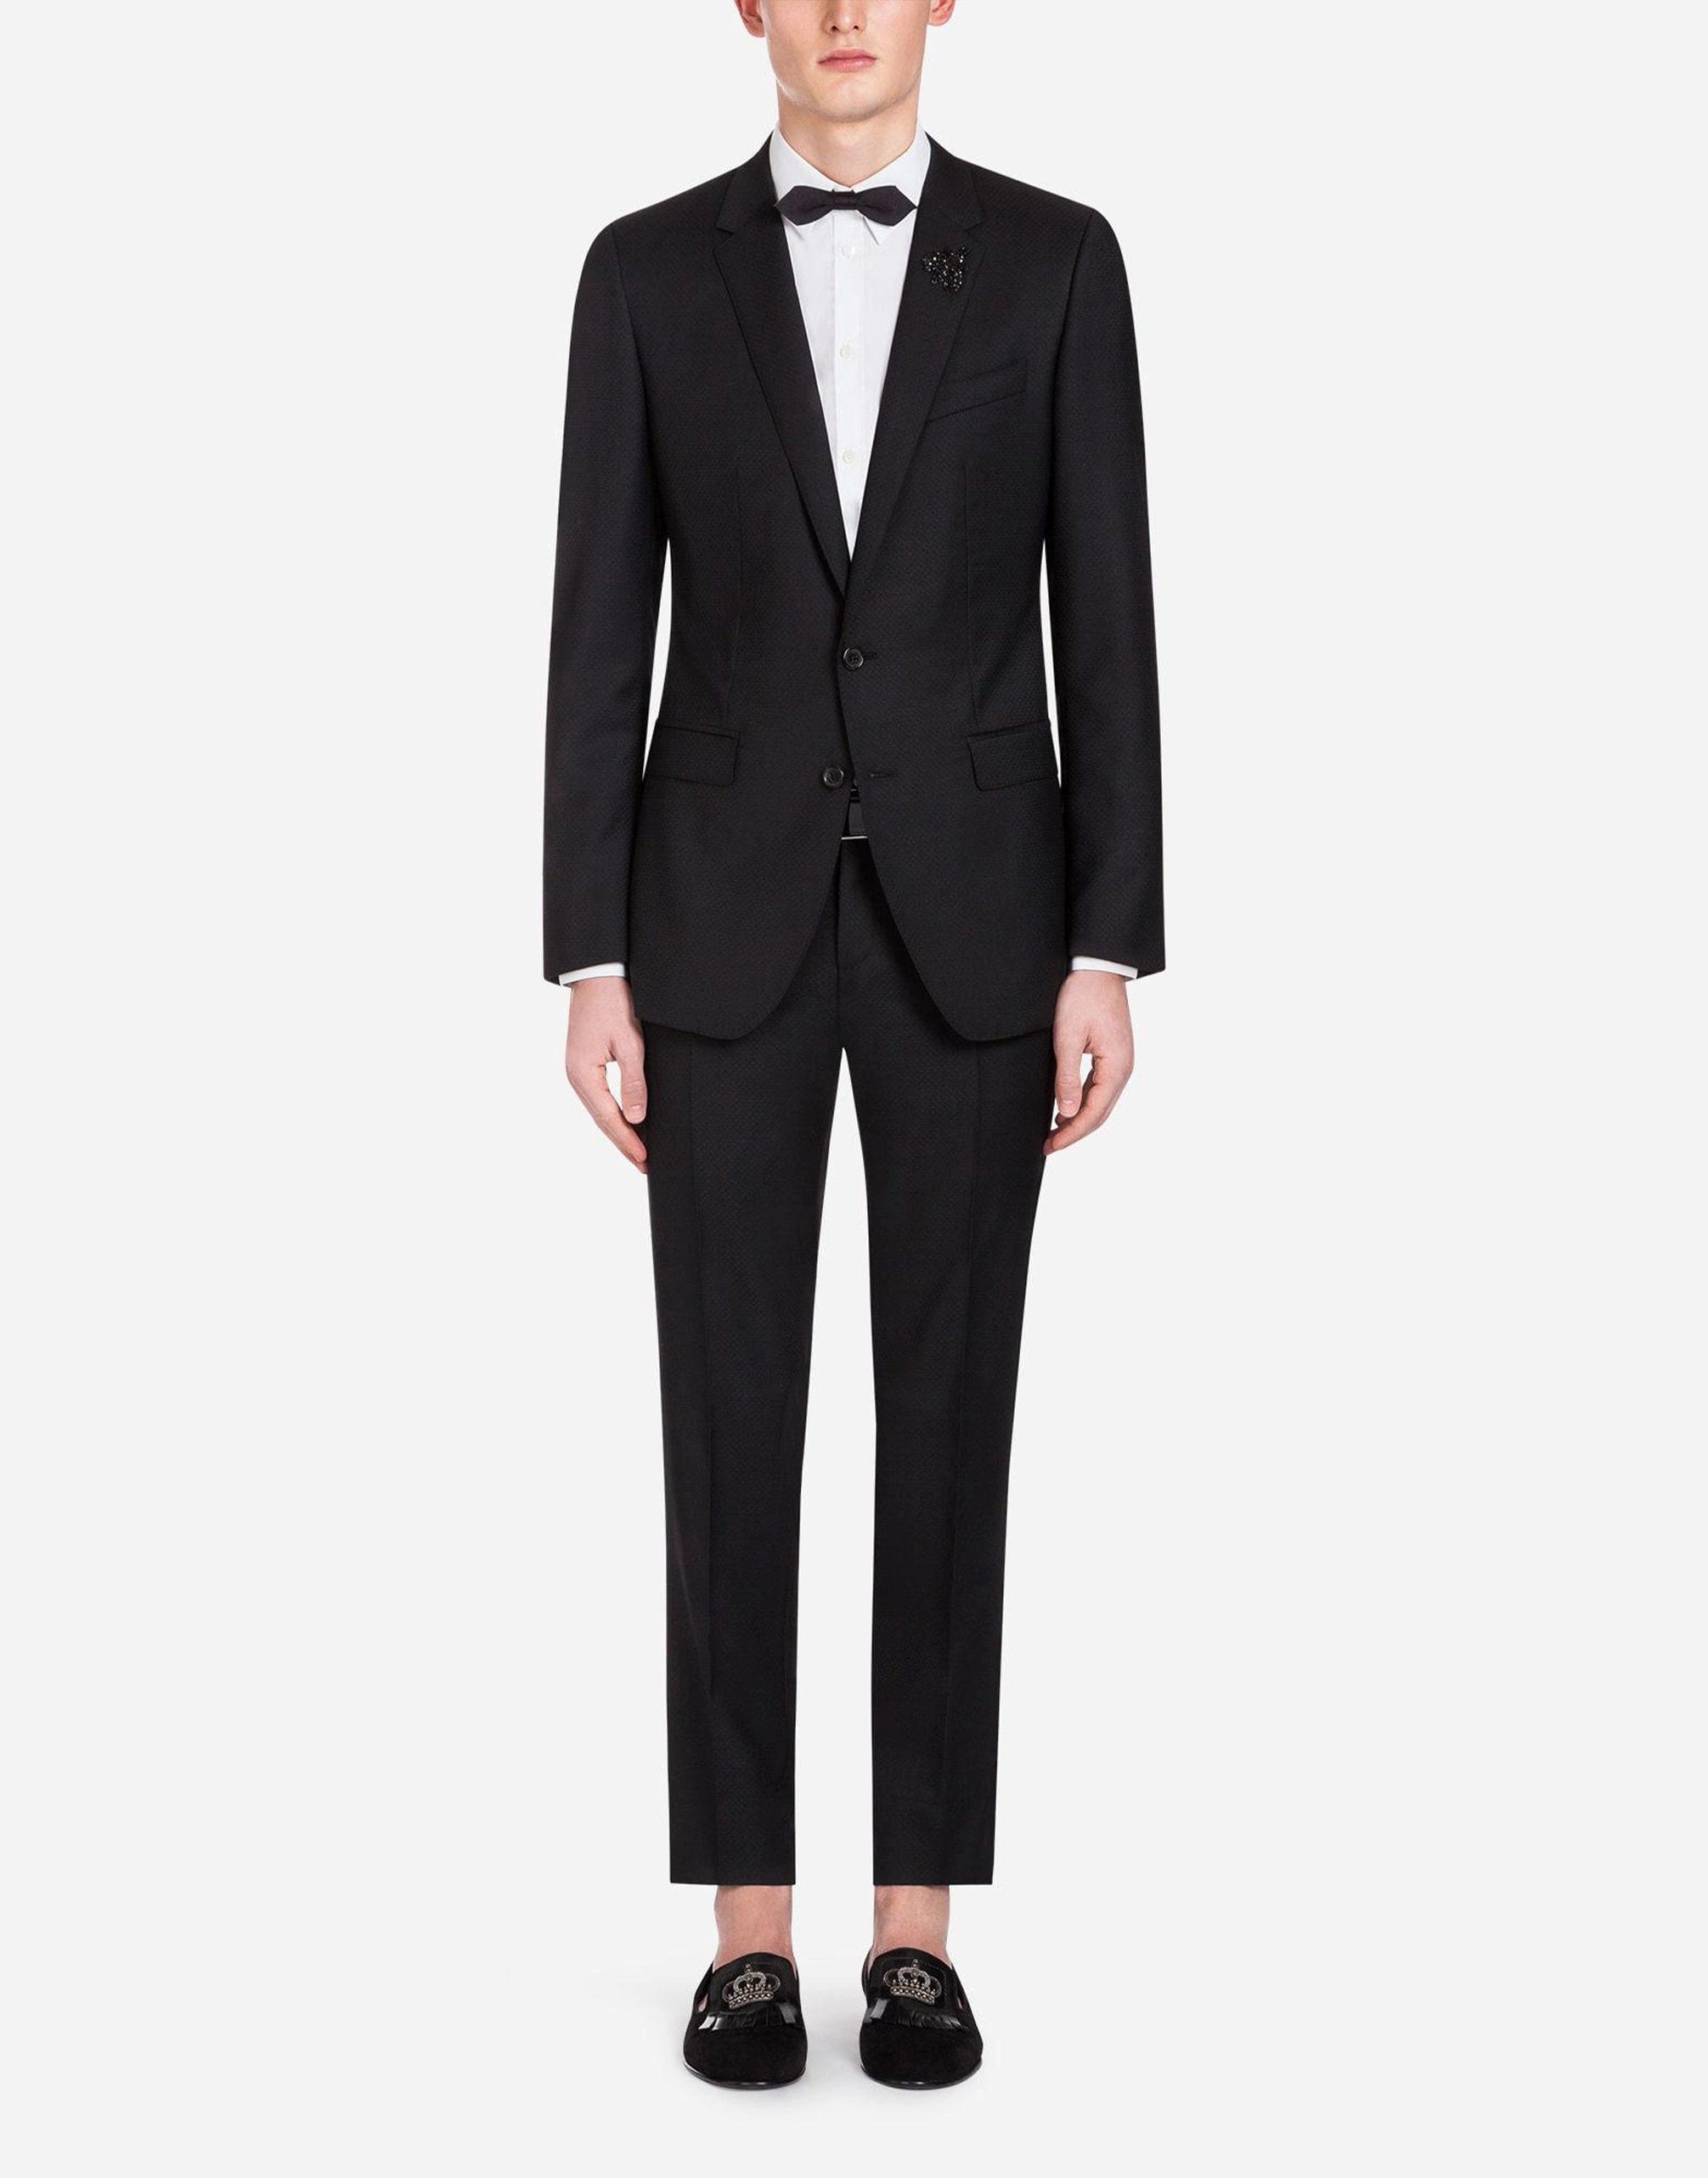 Dolce & Gabbana Jacquard Wool Martini Suit With Patch